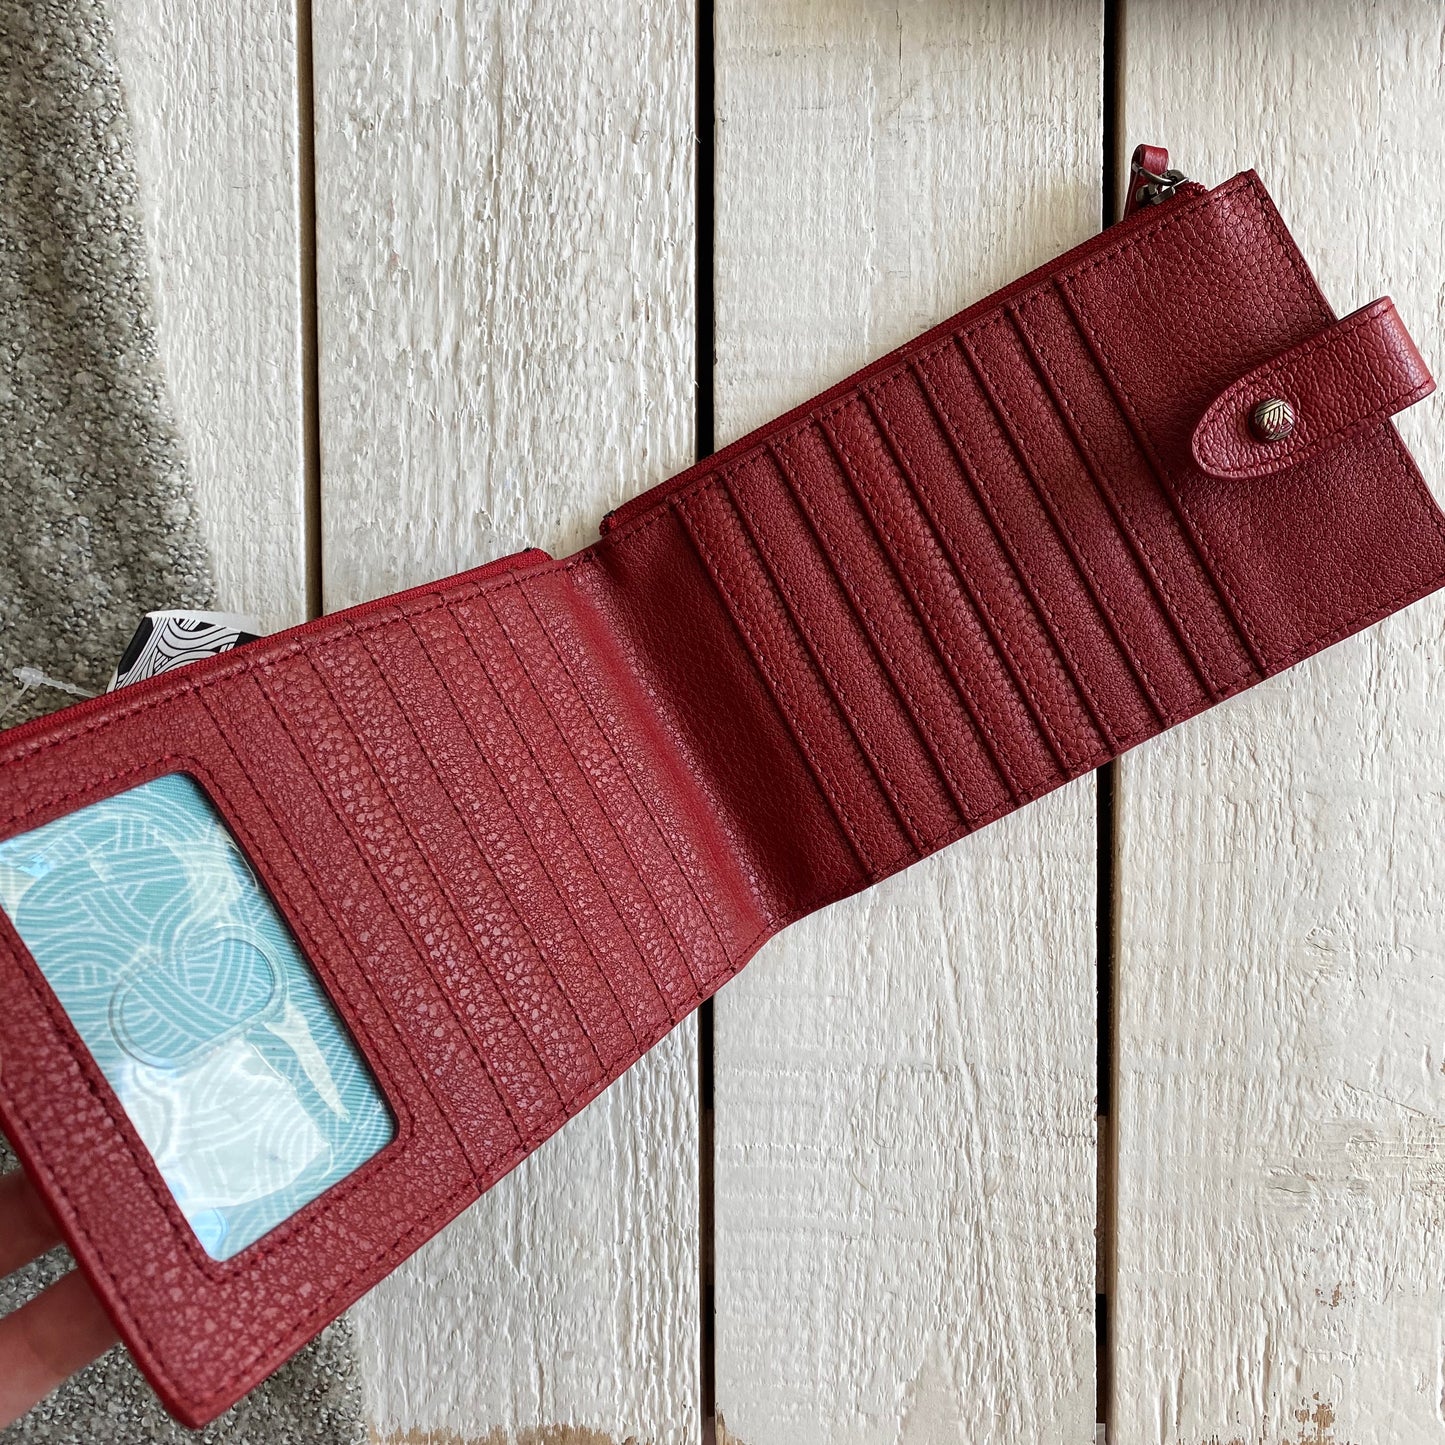 The Sak Studded Red Leather Wallet